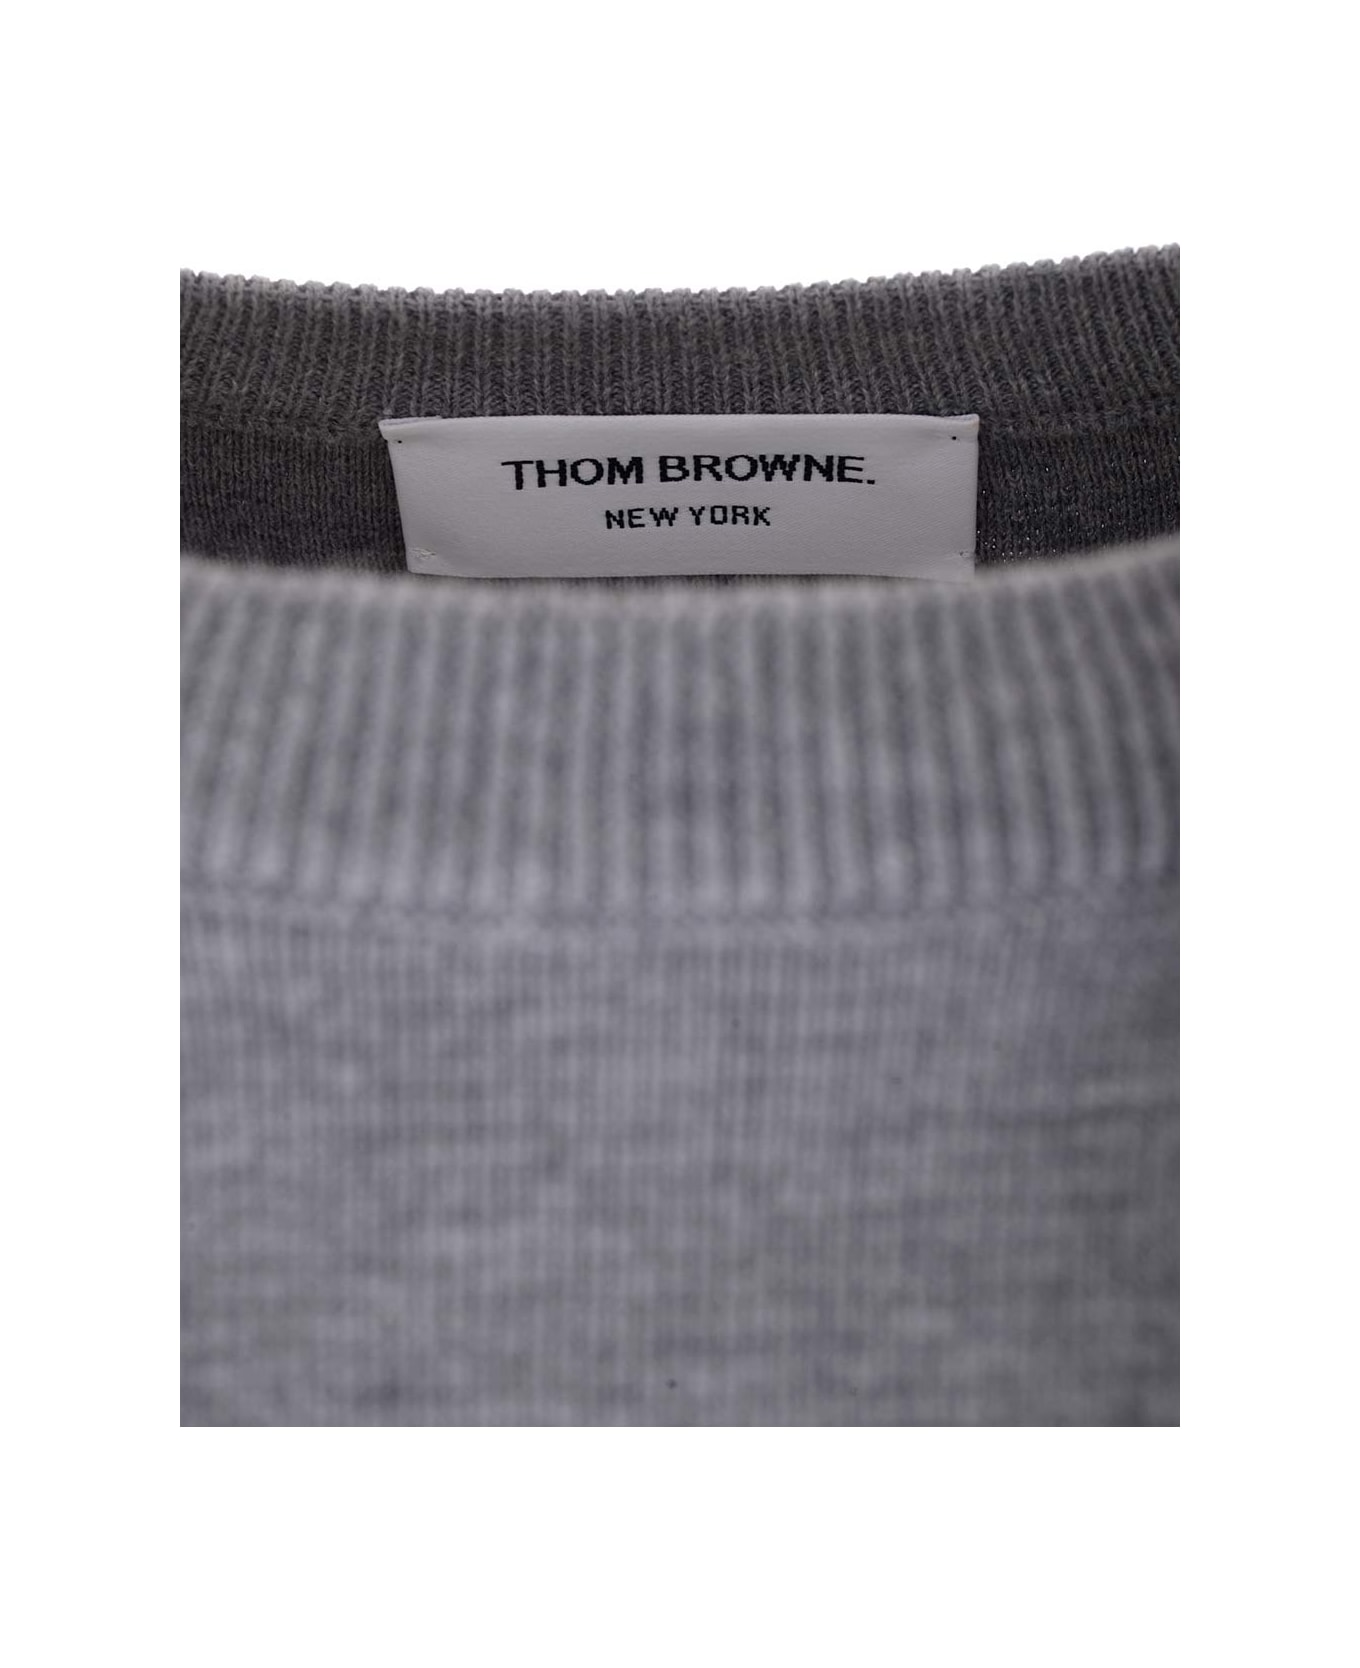 Thom Browne Gray Crewneck Pullover With Stripes - Light grey ニットウェア